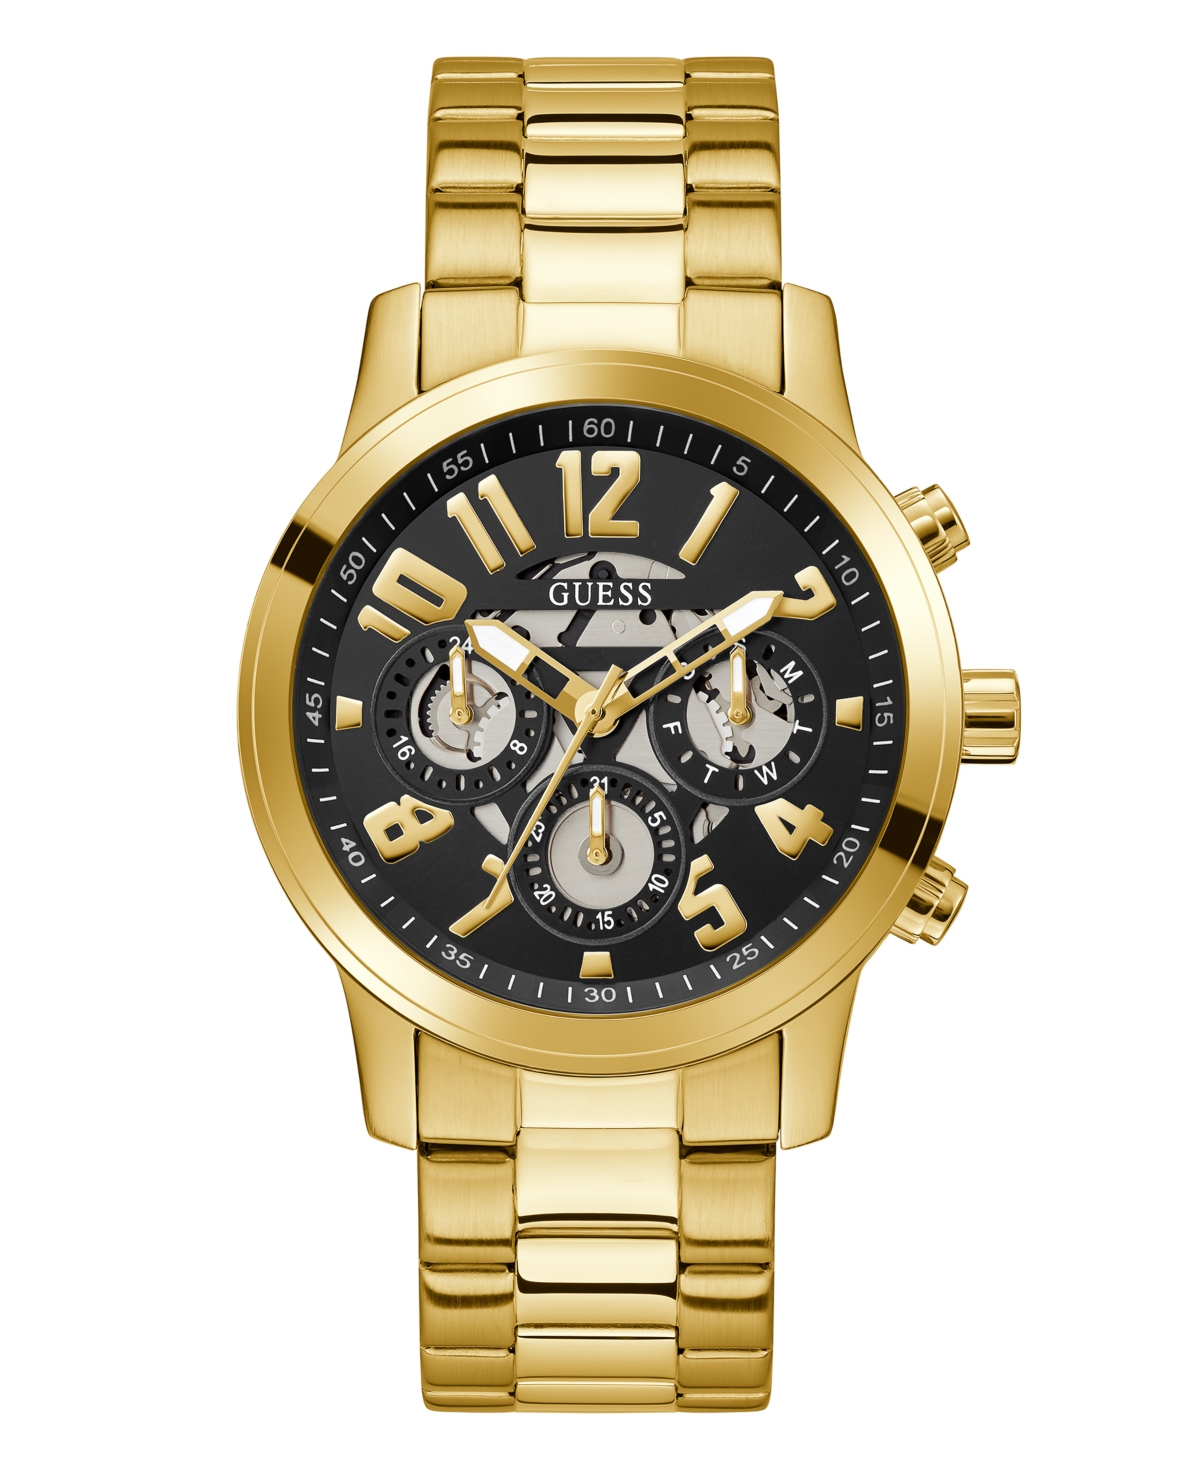 Guess Men's Multi-function Gold-tone Stainless Steel Watch 44mm